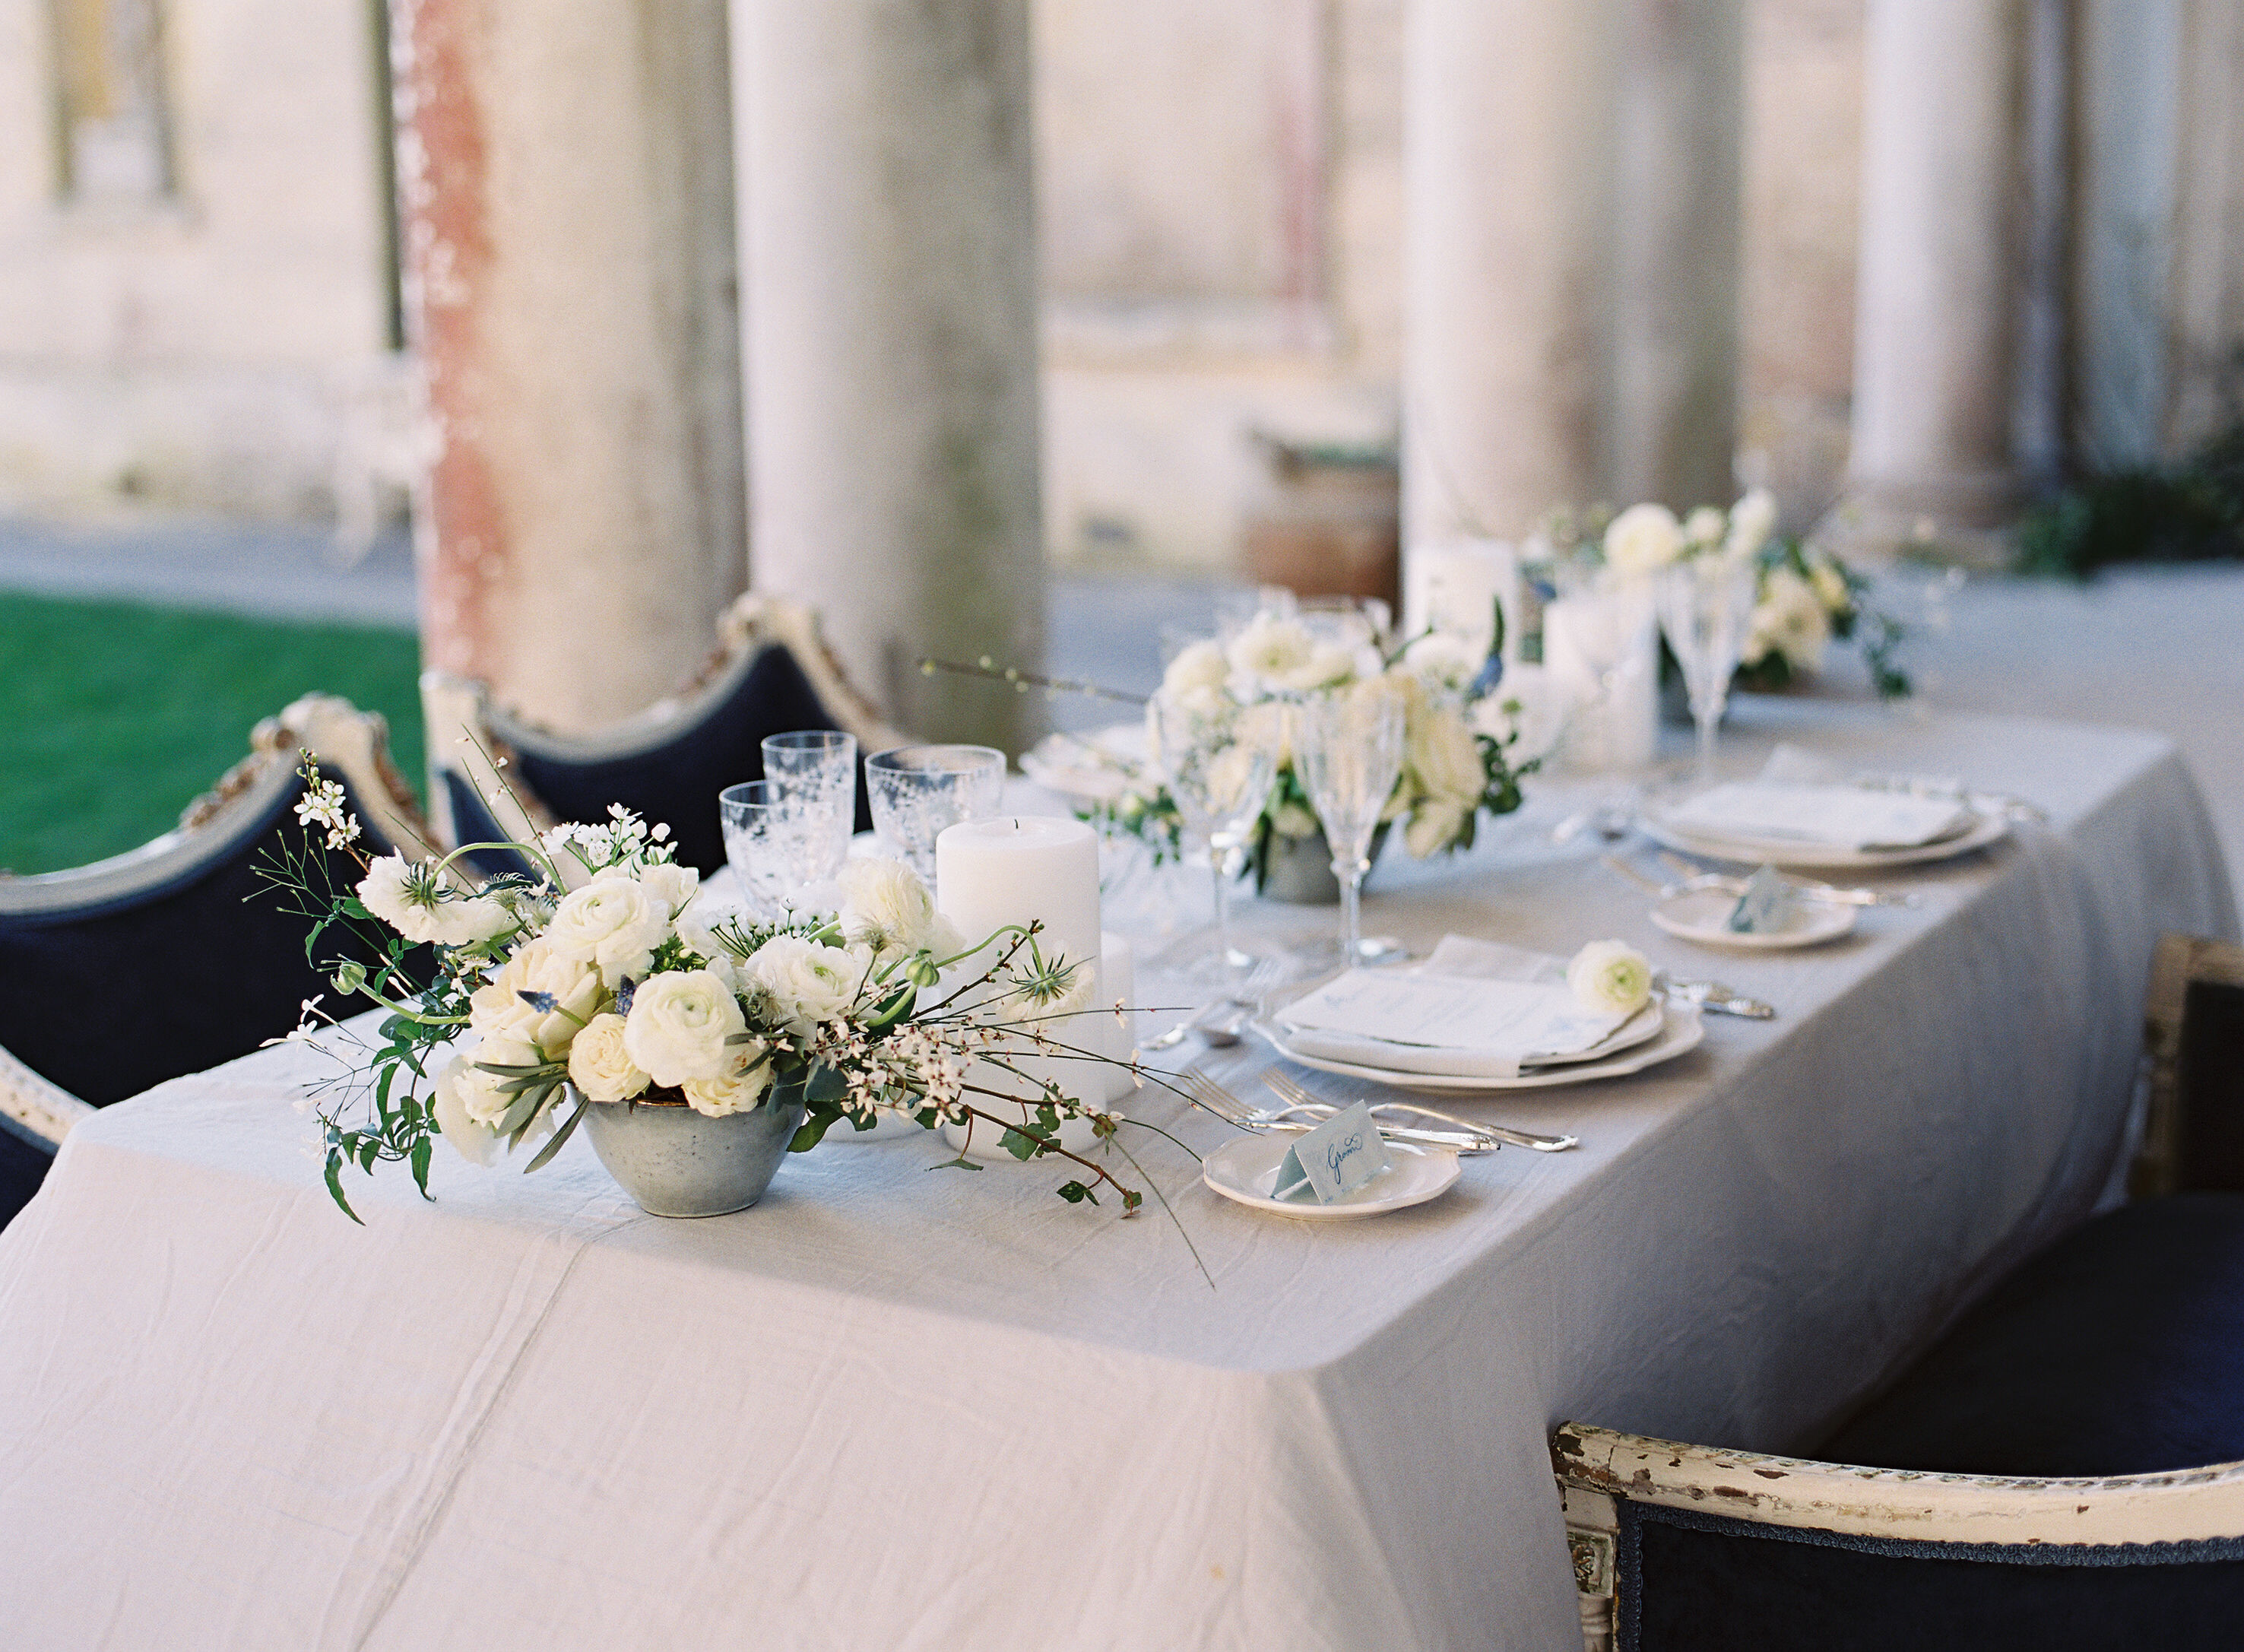 Romantic tablescape with Spring flowers for Somerley House wedding inspiration. Photo by Camilla Arnhold